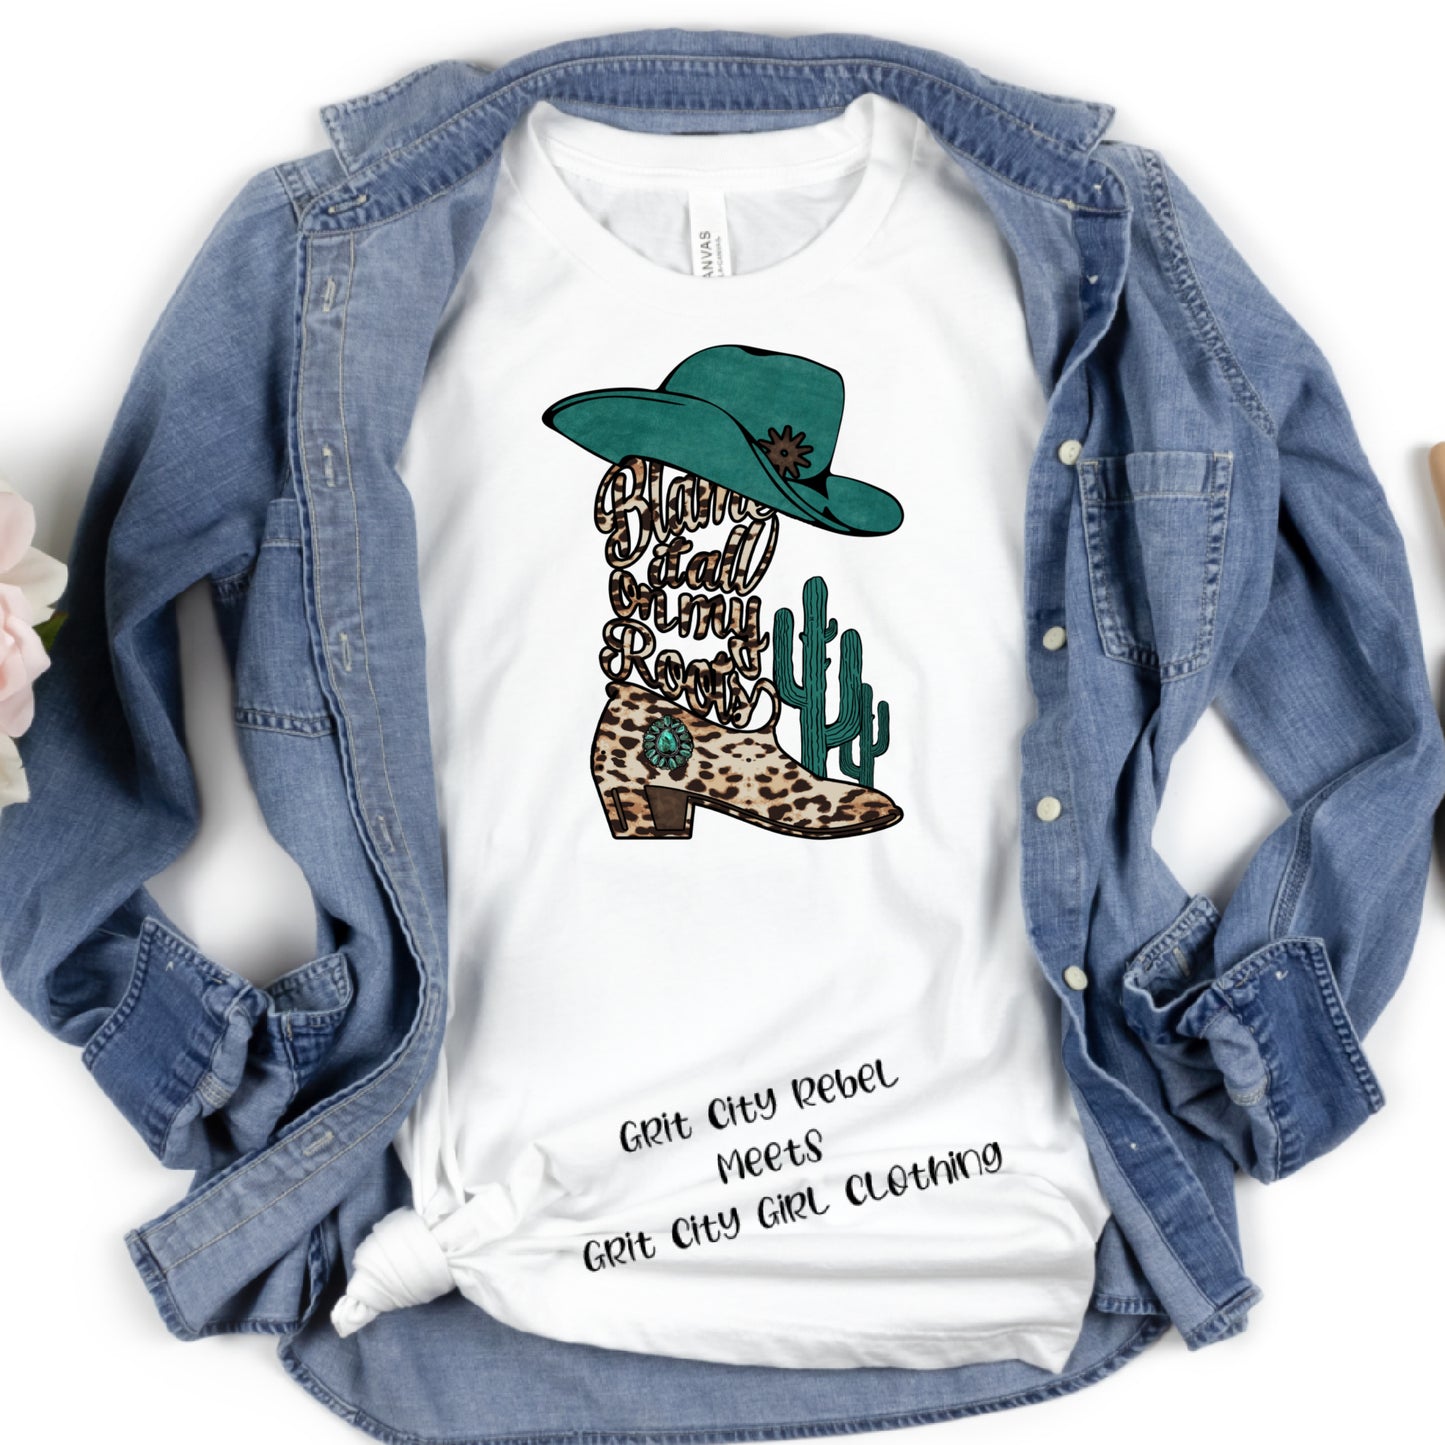 Blame it on my boots leopard and teal boots and cowgirl hatunisex short sleeve T-Shirt Grit City Rebel